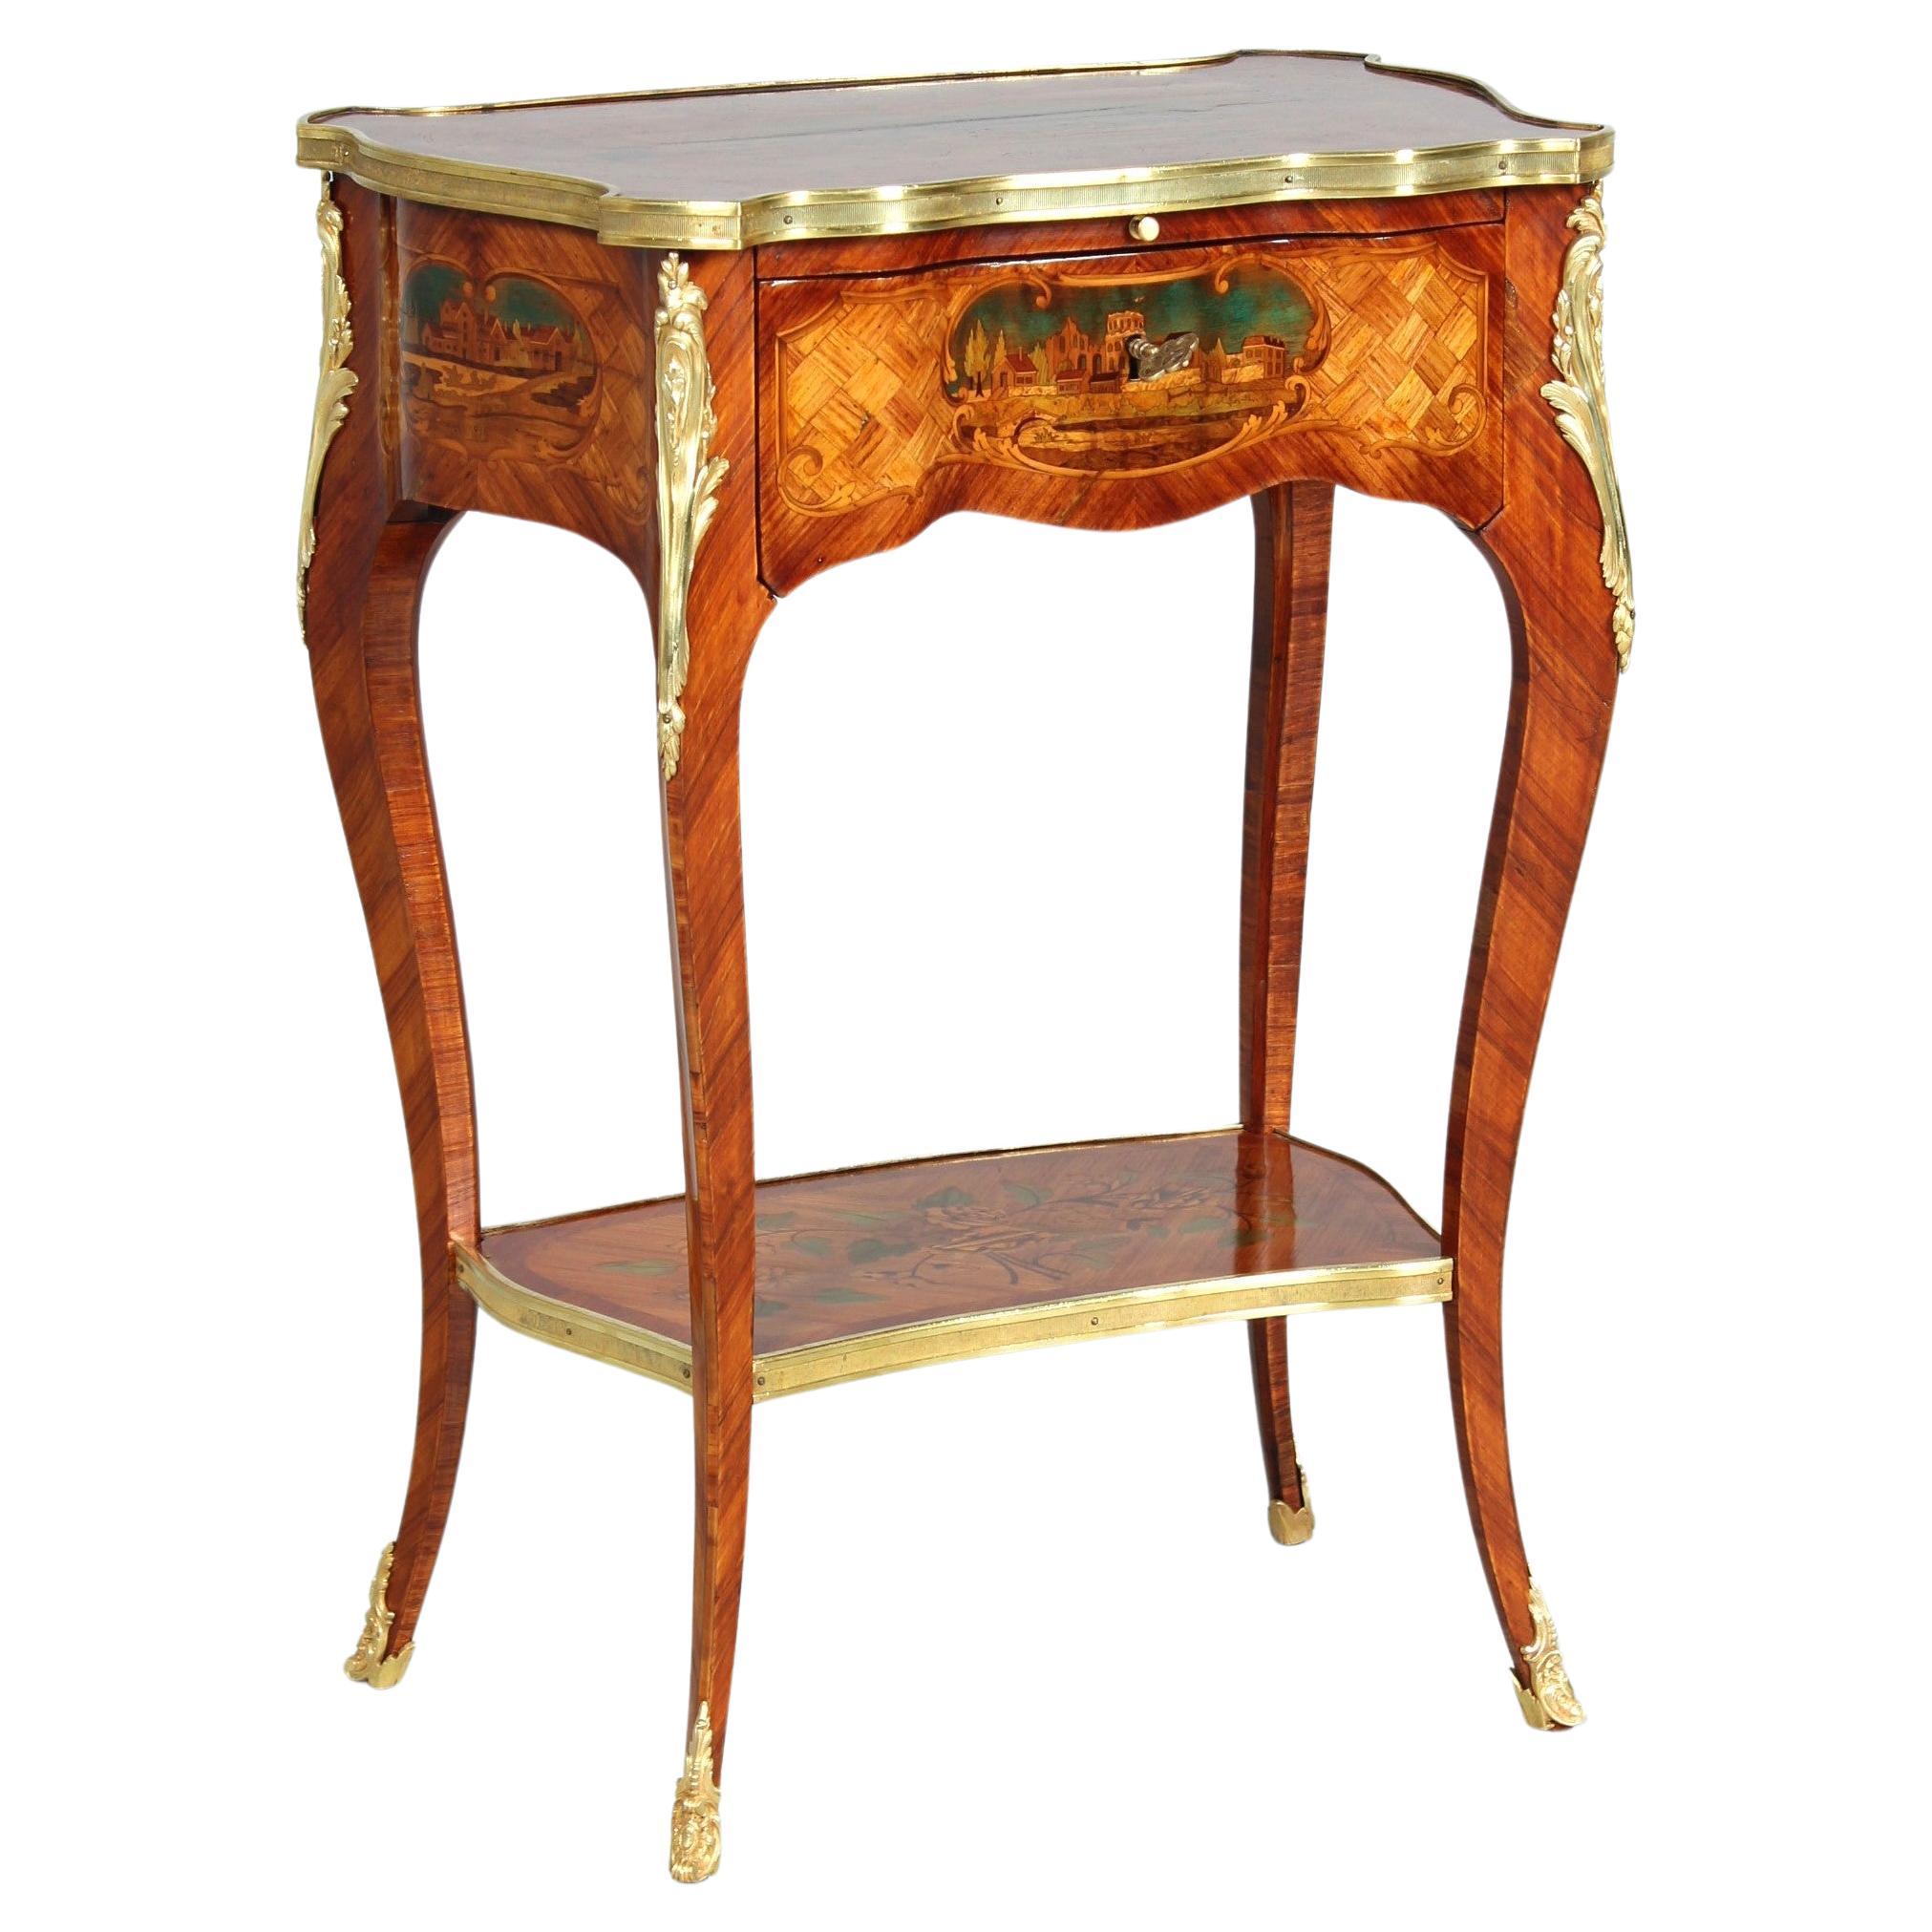  Ladies Desk with Fine Marquetry, Attributed to Beurdeley, Paris, circa 1880 For Sale